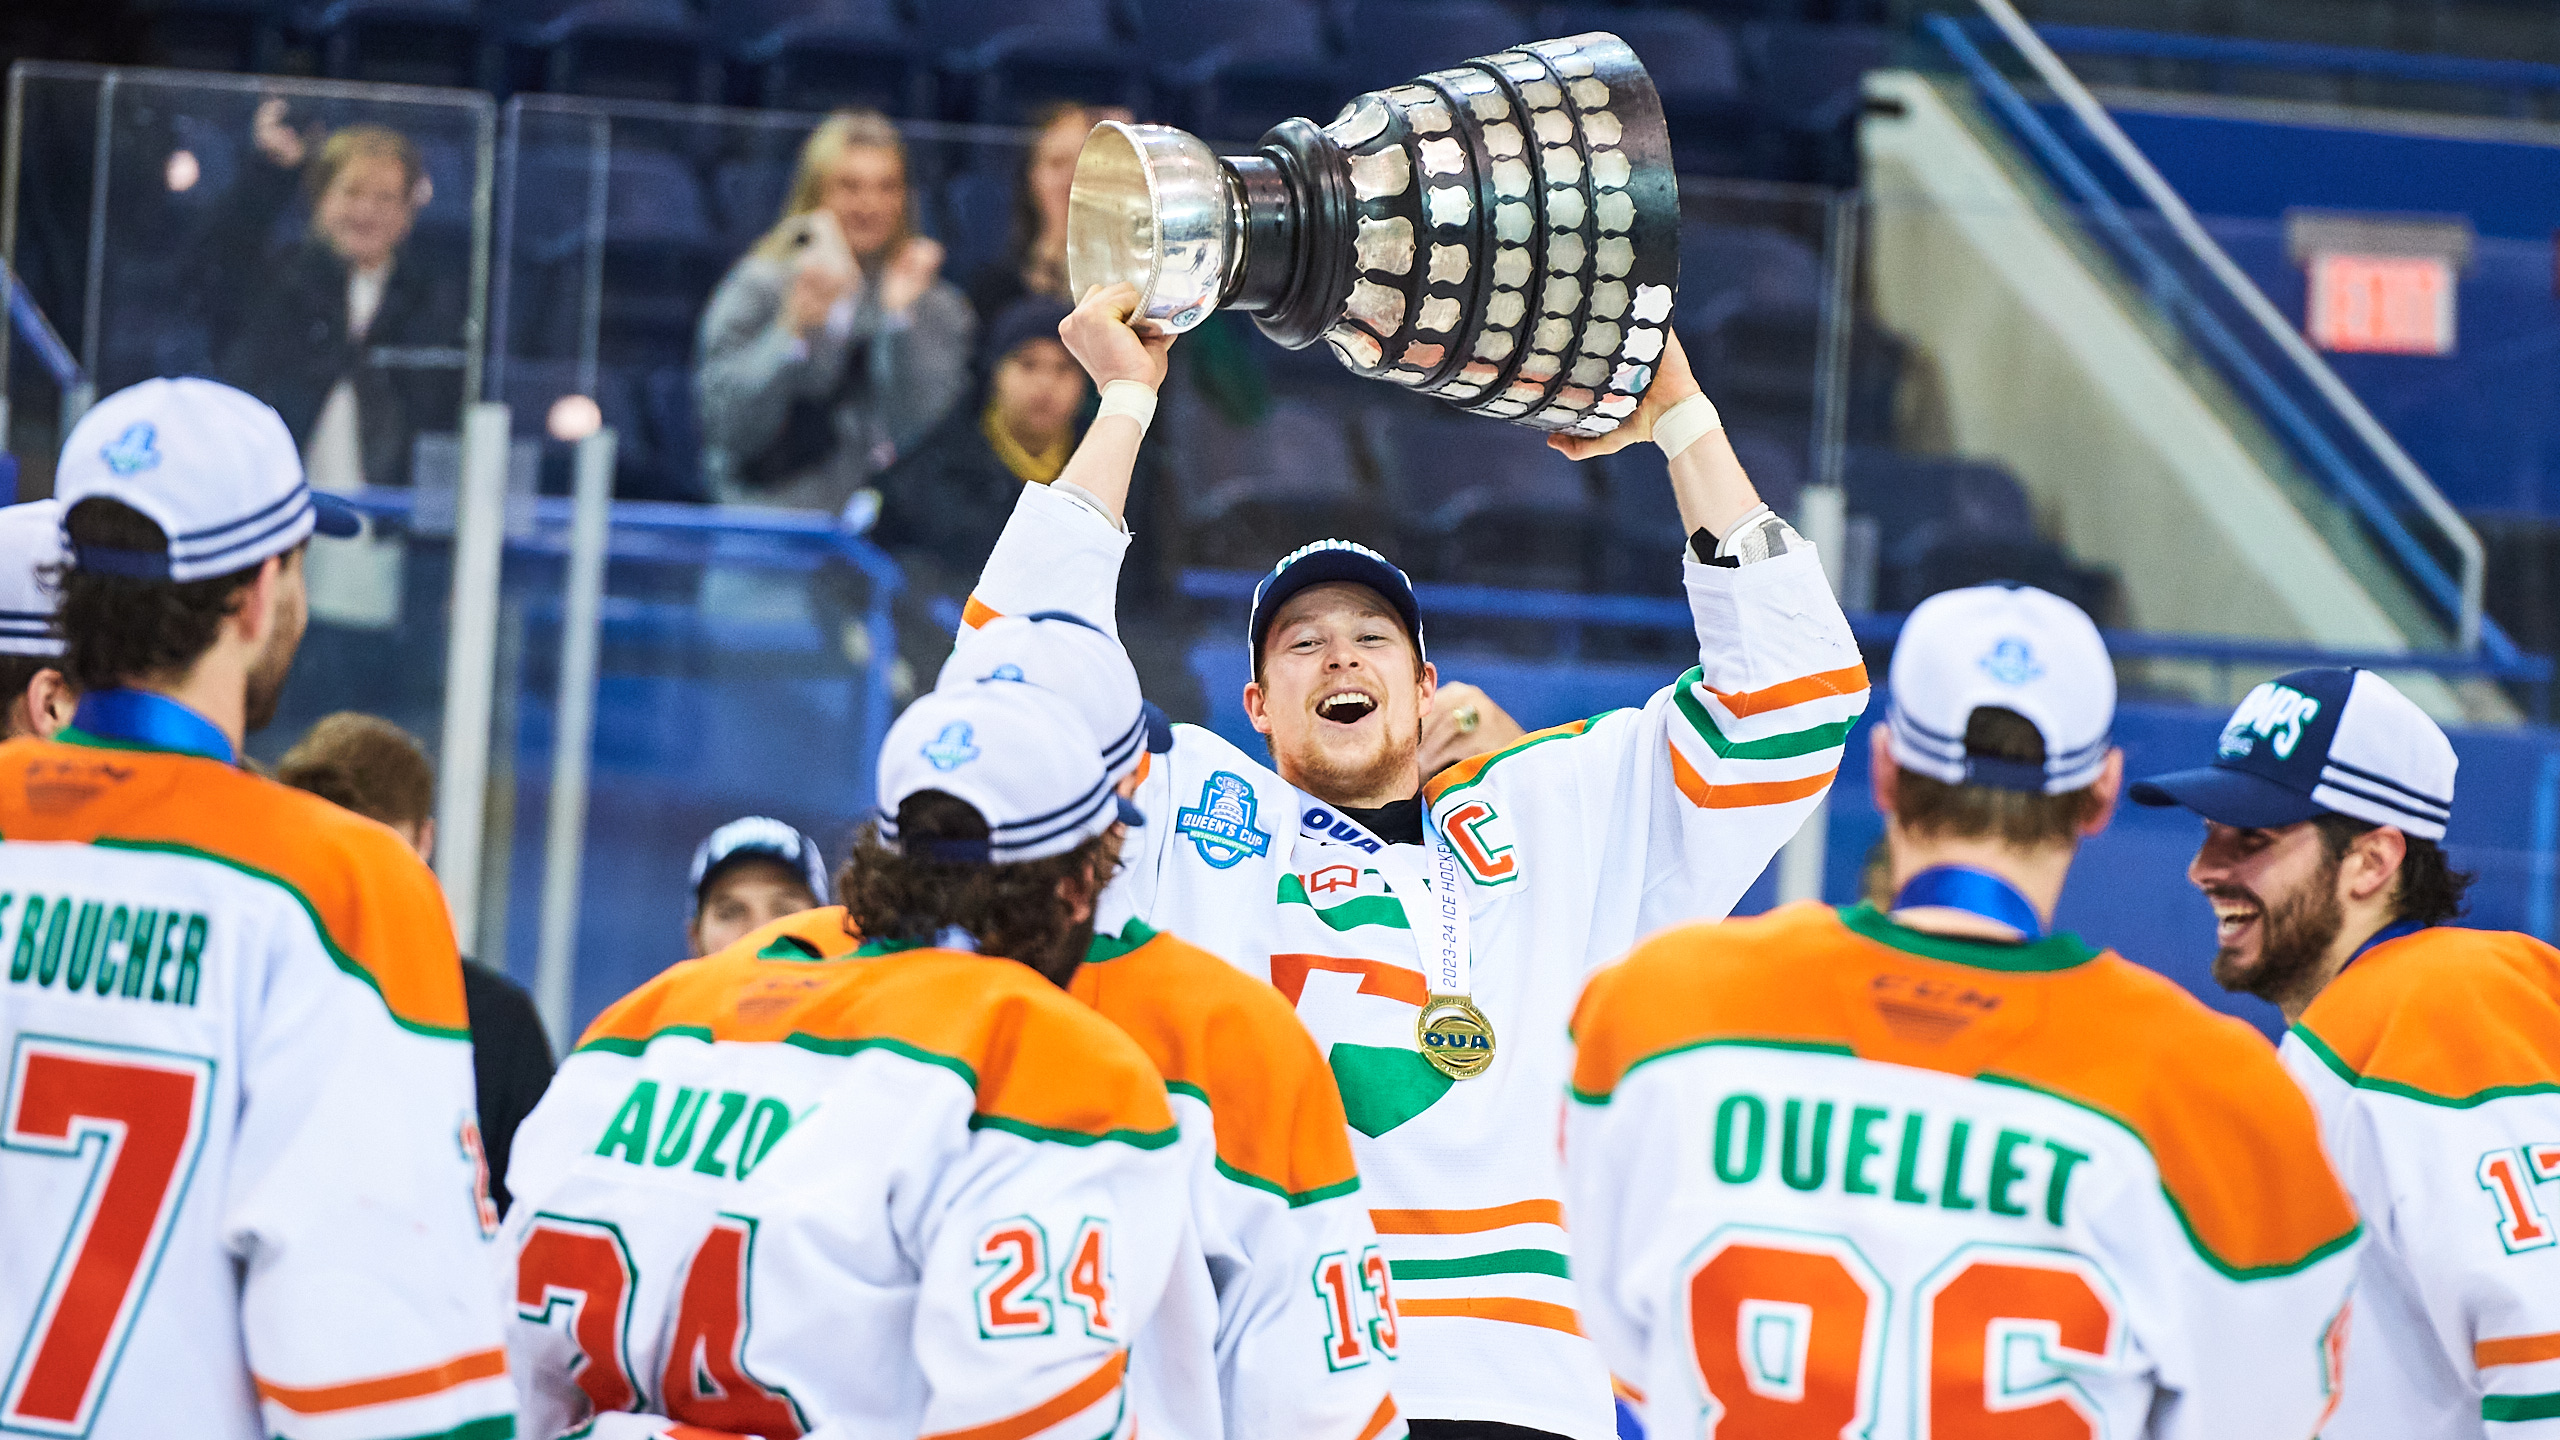 UQTR captain lifts the Queen's Cup and smiles